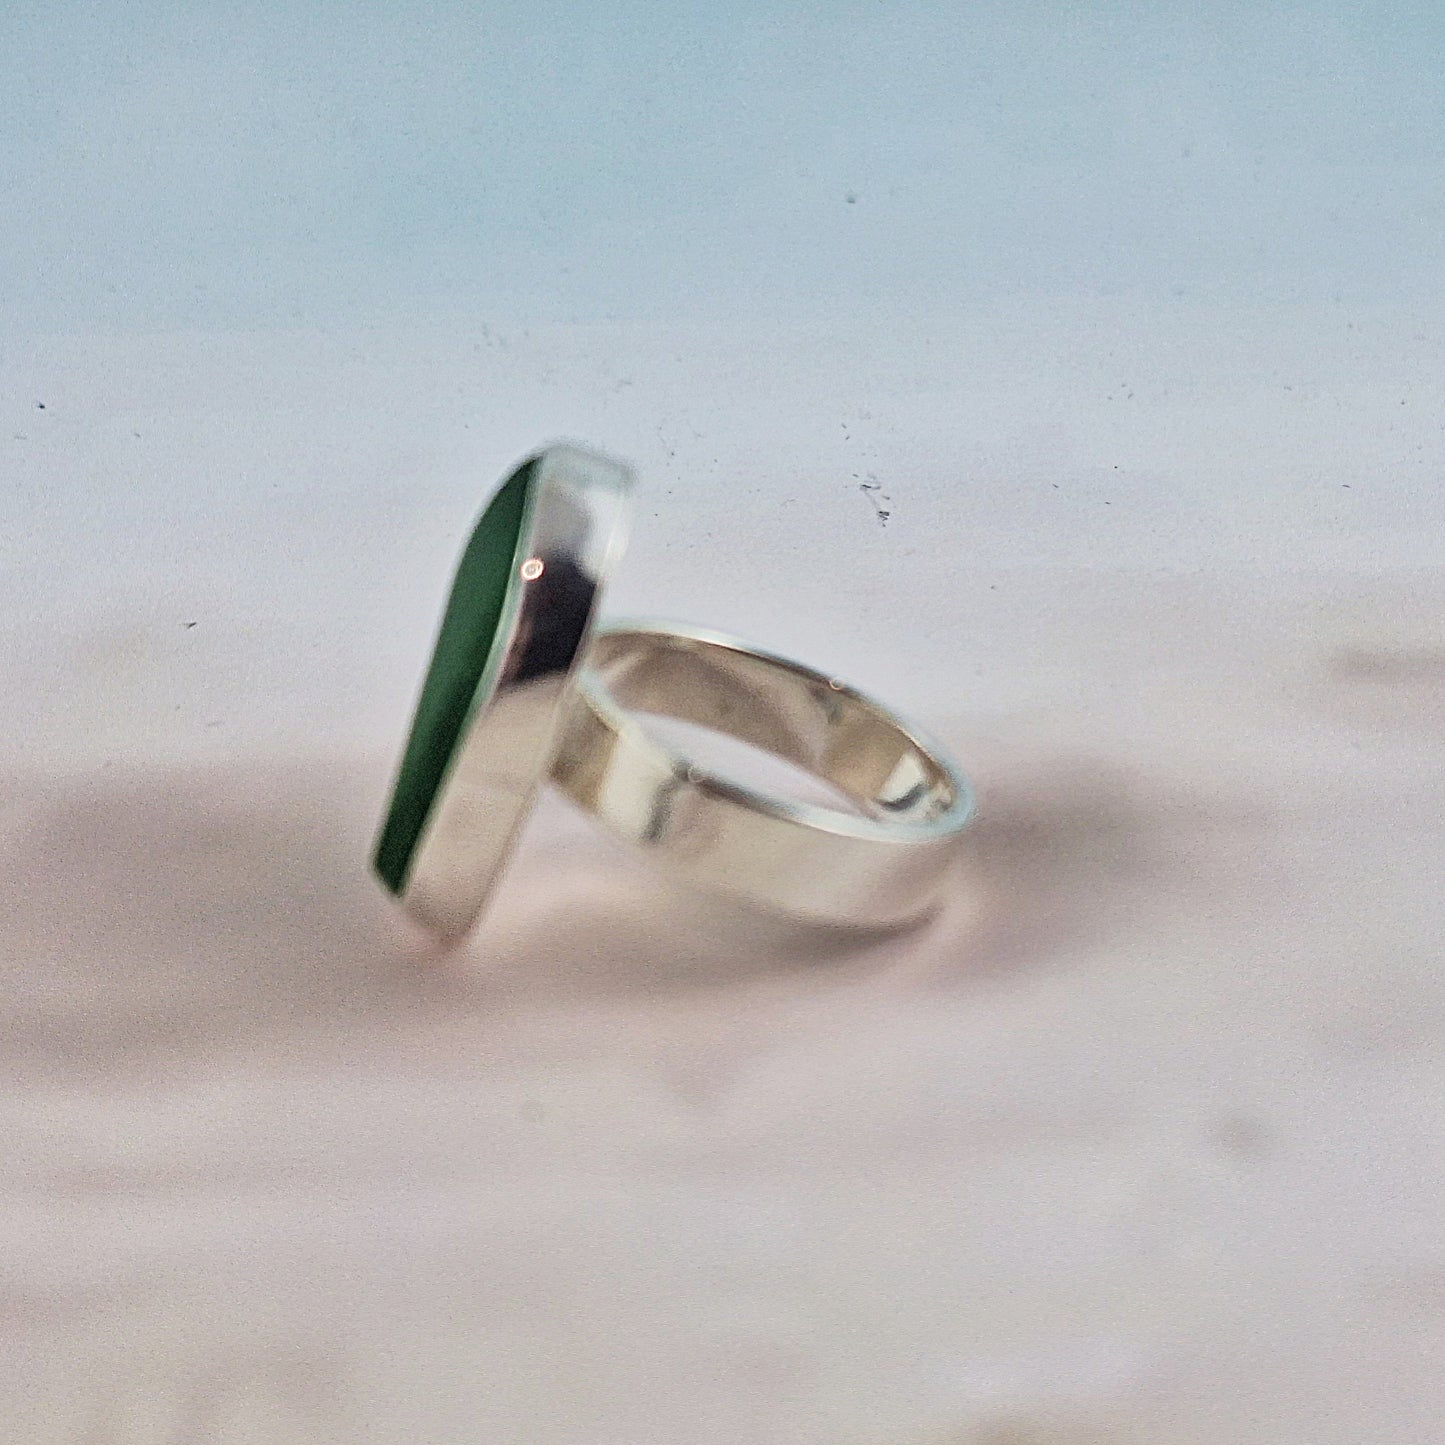 Ring size 7: Sea Witch Green